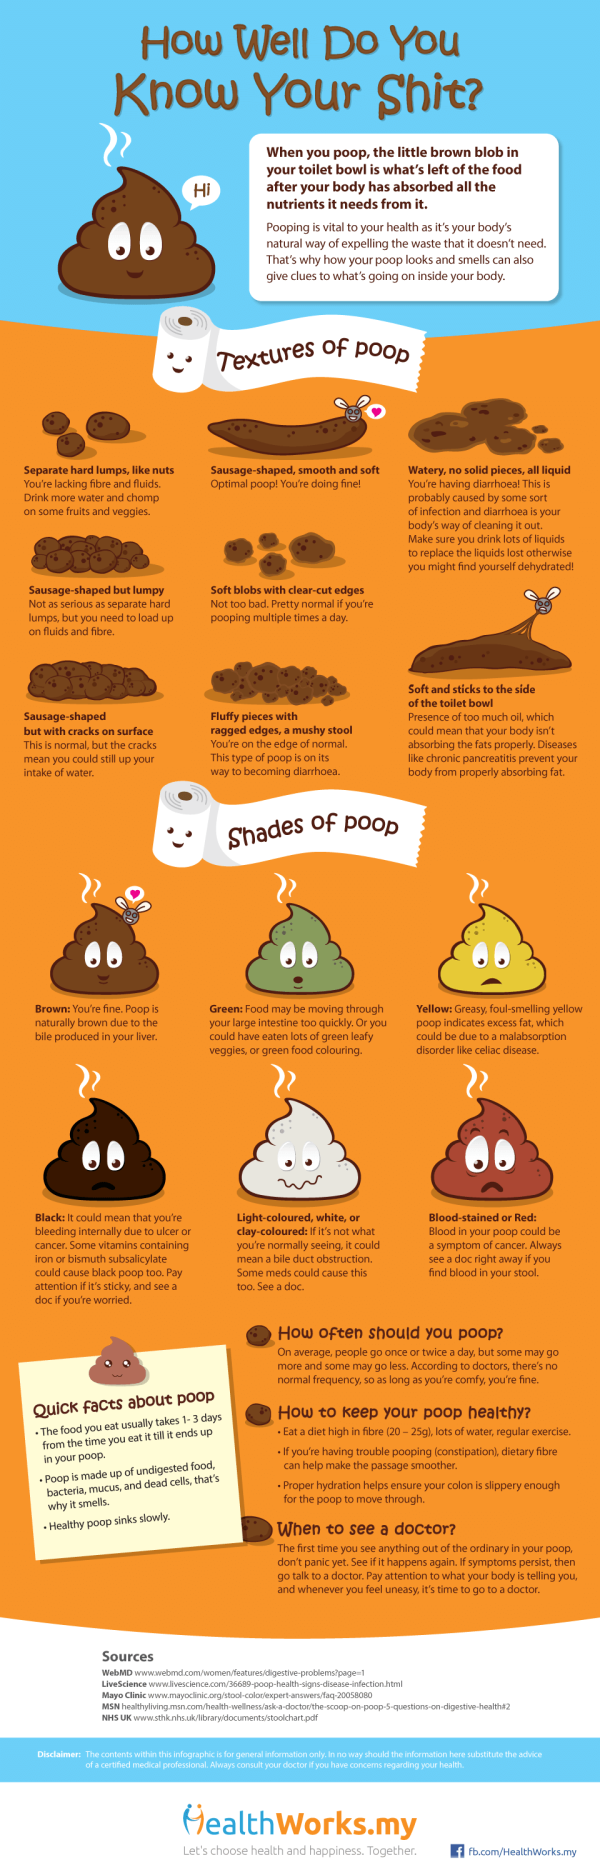 How Well Do You Know Your Shit? infographic